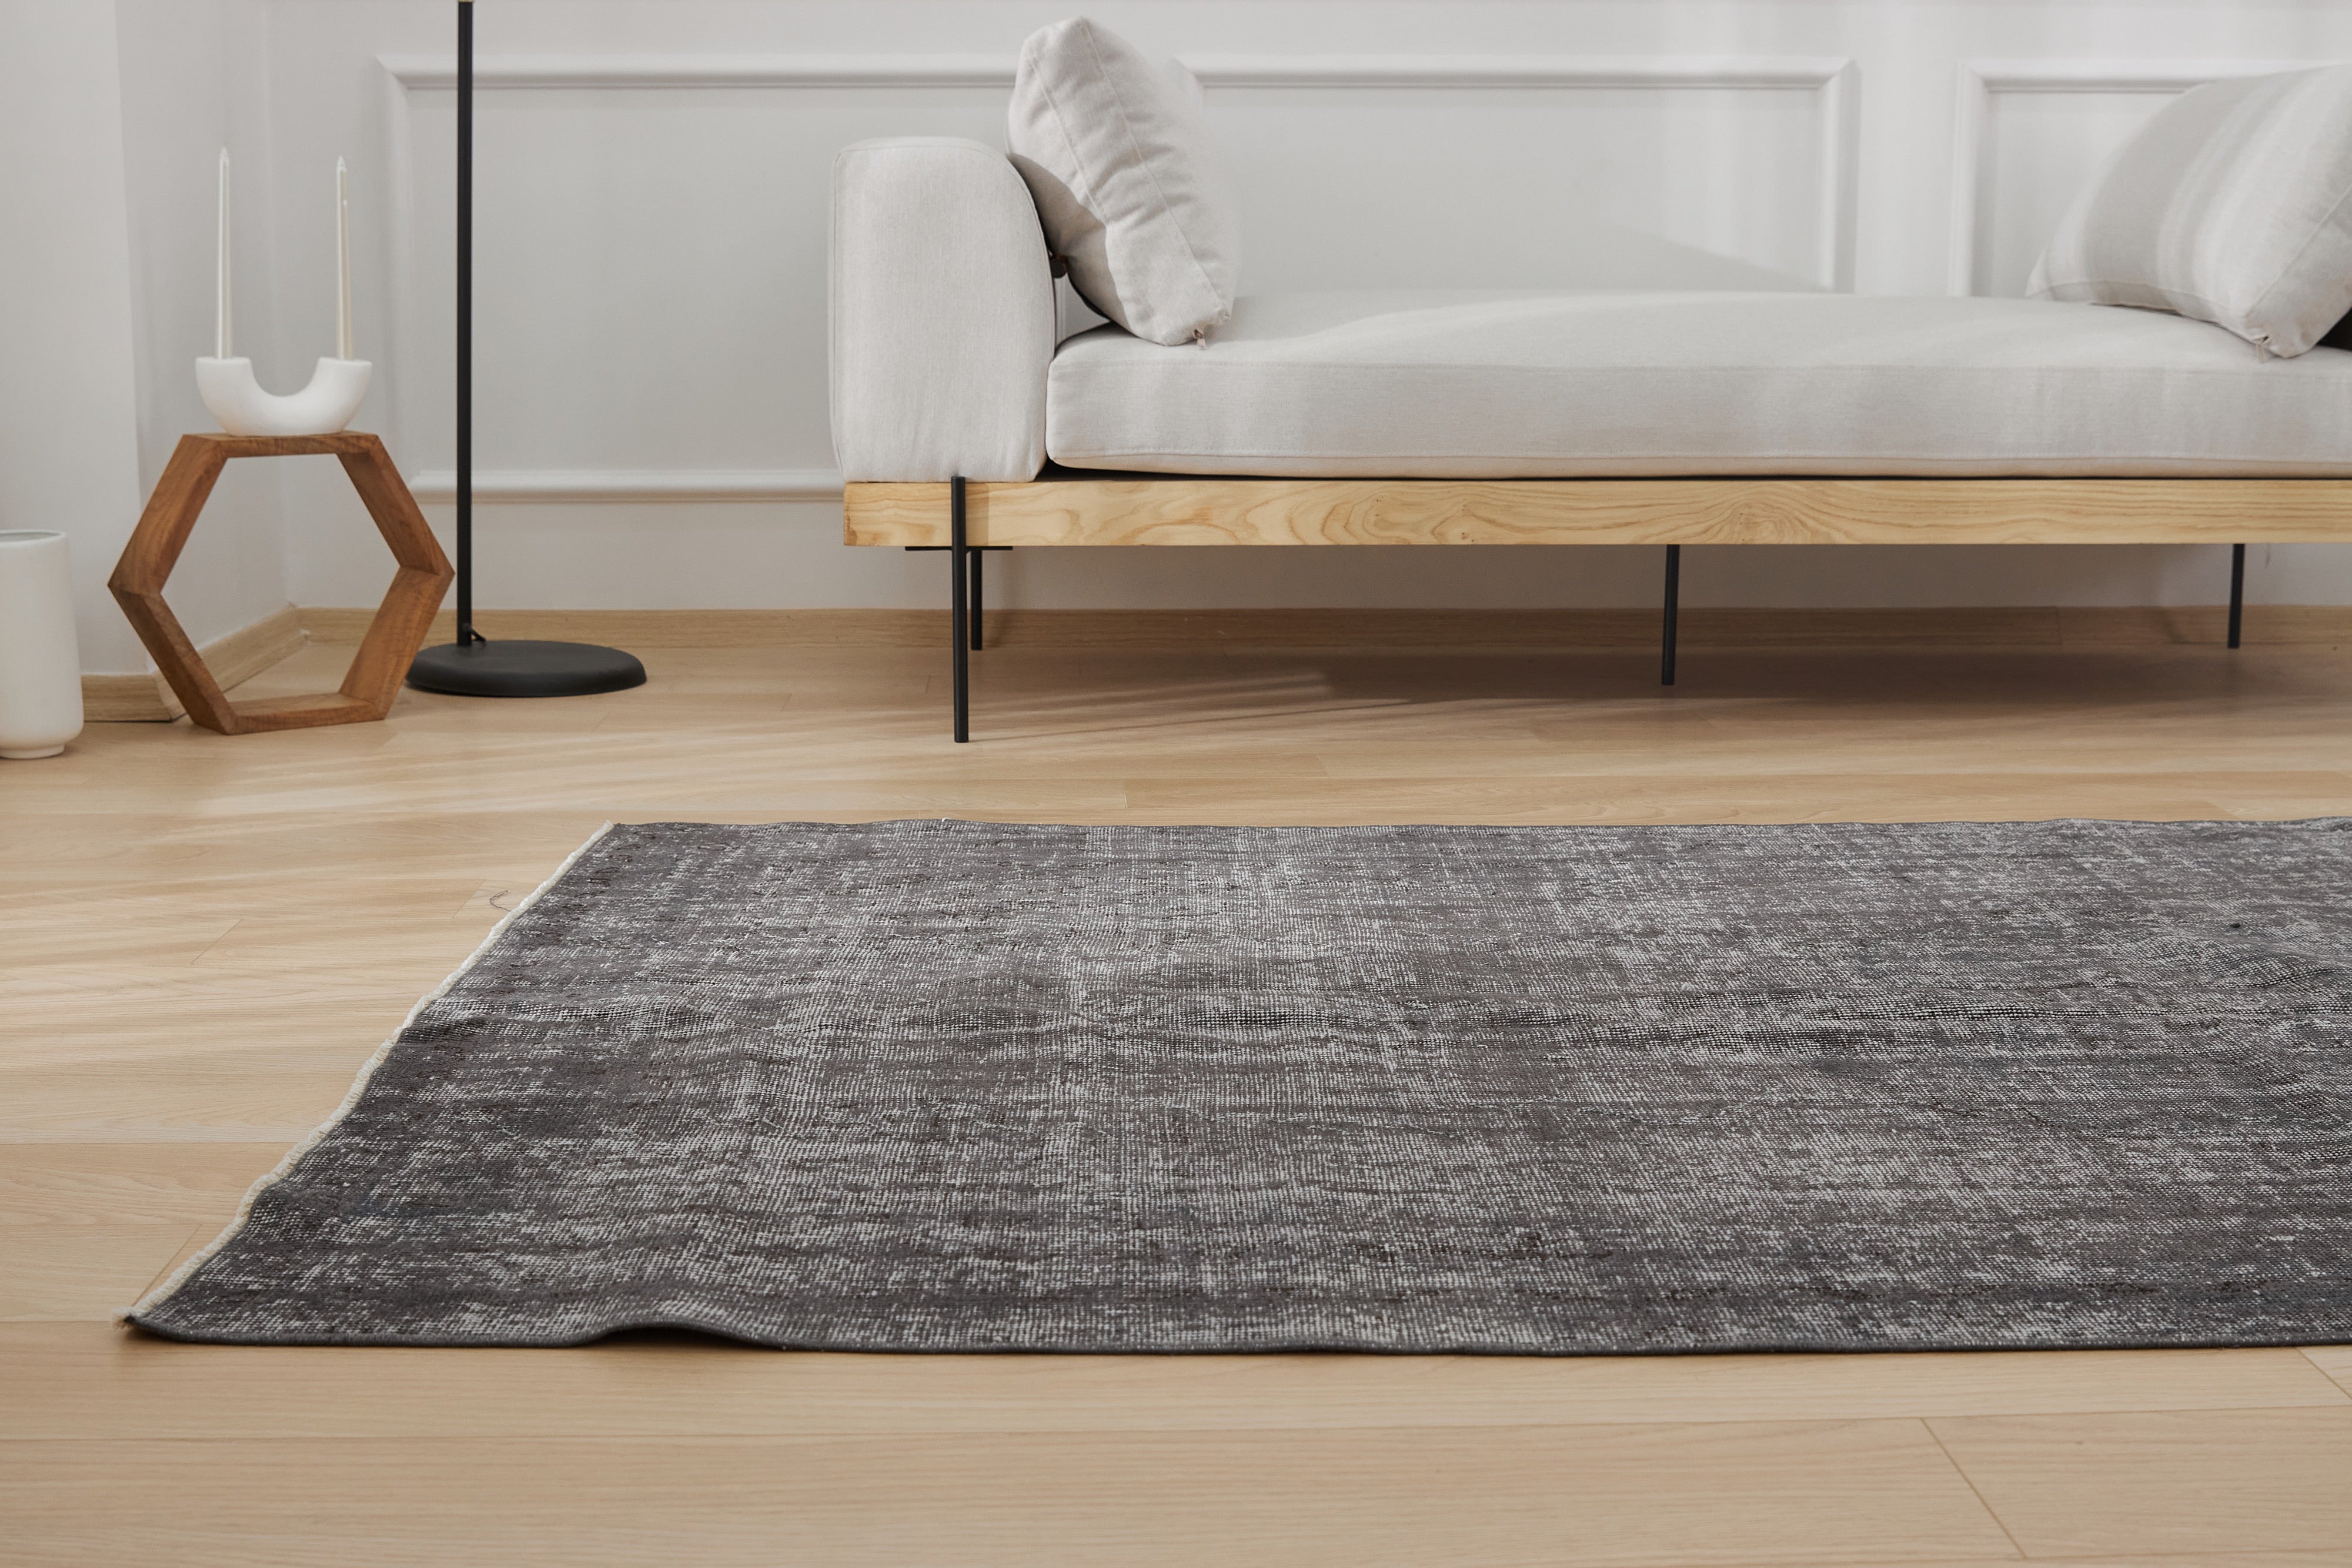 Sara's Essence | Authentic Turkish Rug | Hand-Knotted Carpet | Kuden Rugs